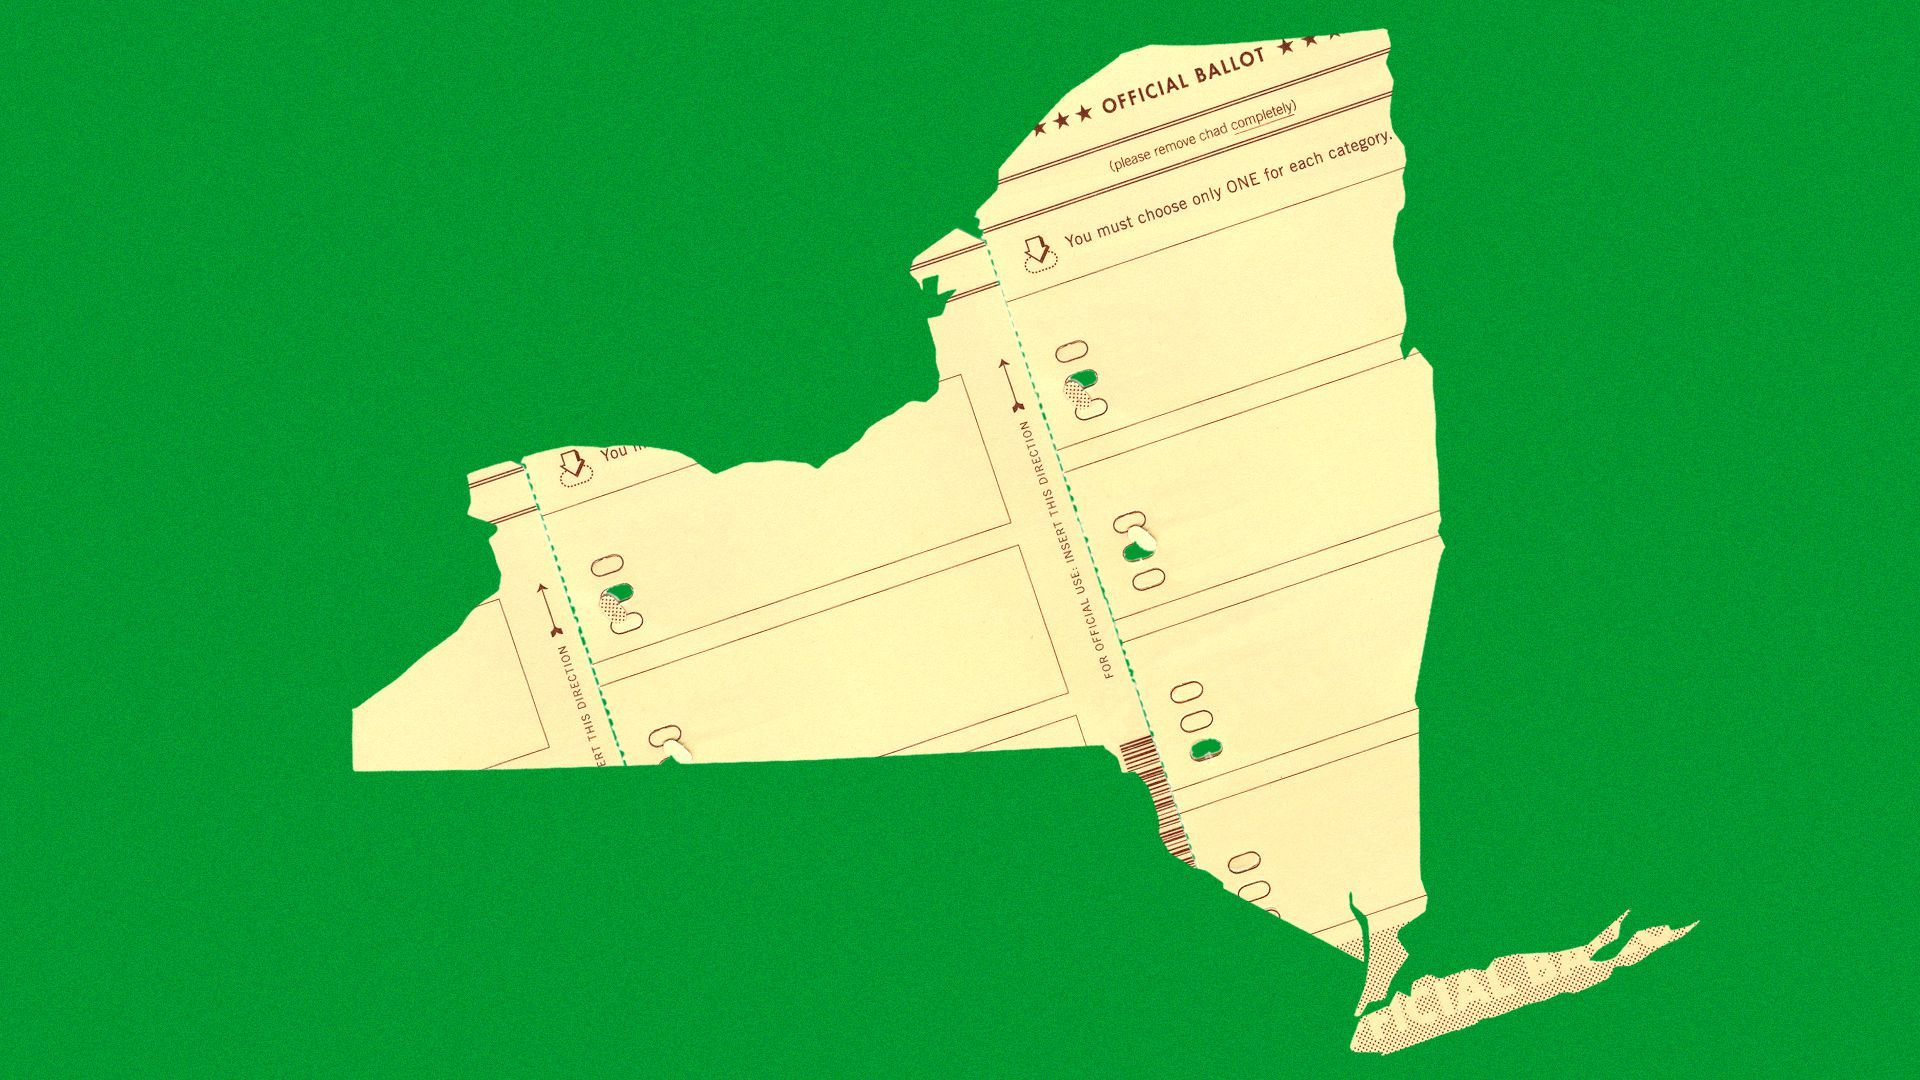 Illustration of election ballots filling a New York state shape